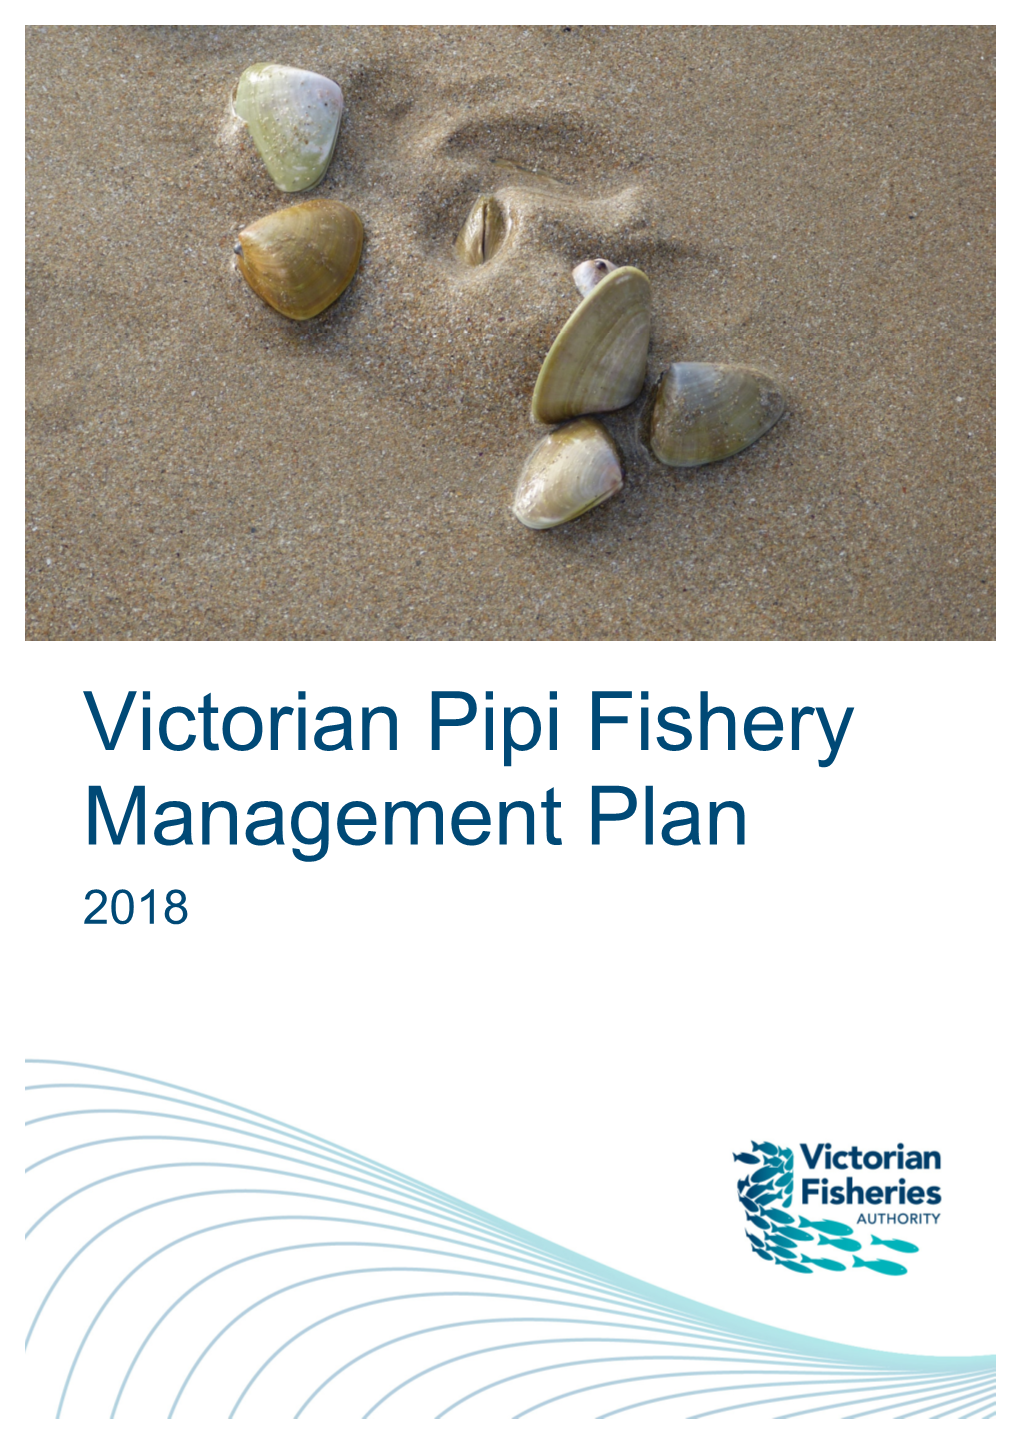 Victorian Pipi Fishery Management Plan 2018